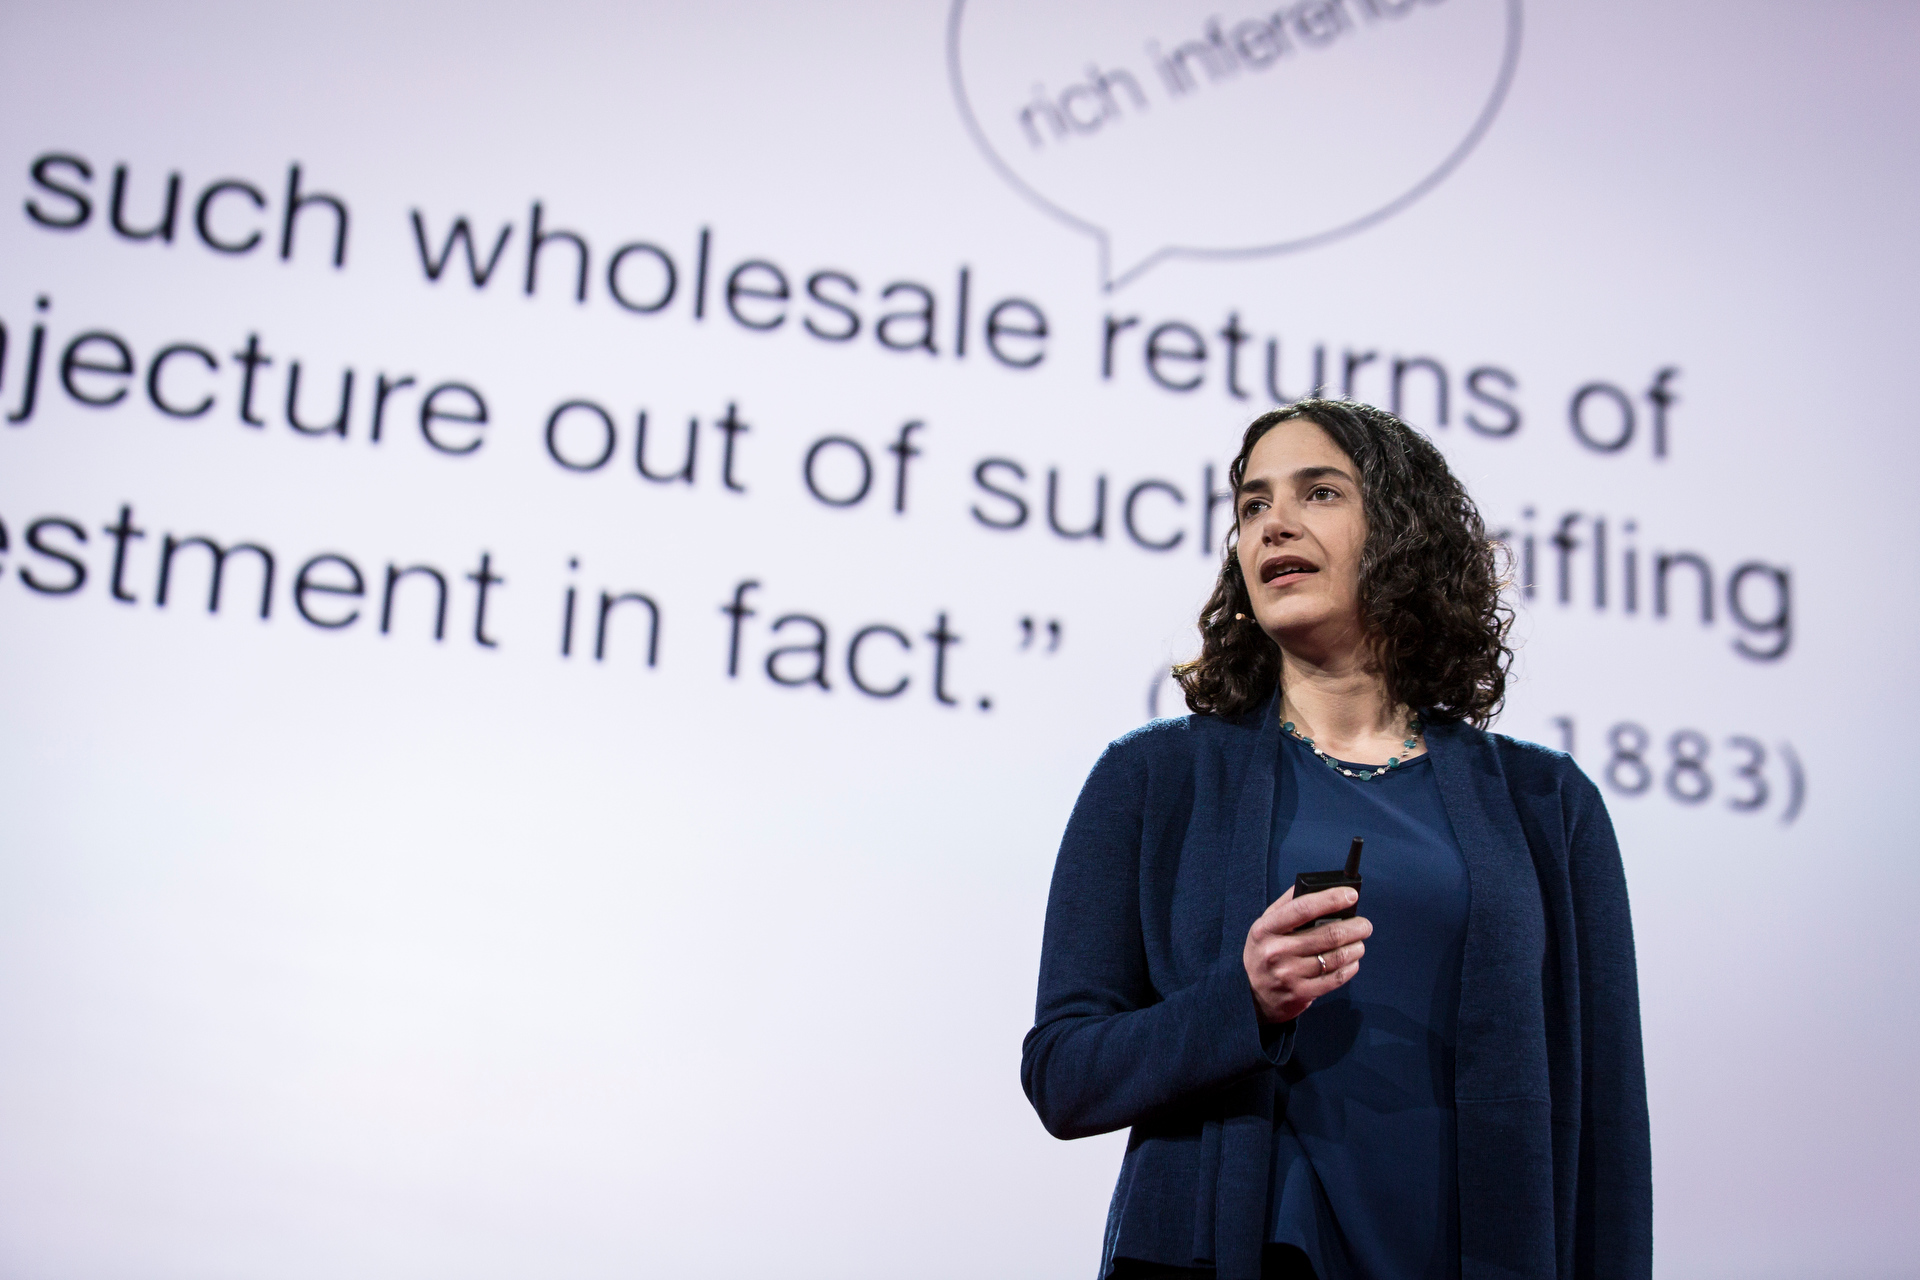 Laura Schulz speaks at TED2015 - Truth and Dare, Session 2. Photo: Bret Hartman/TED